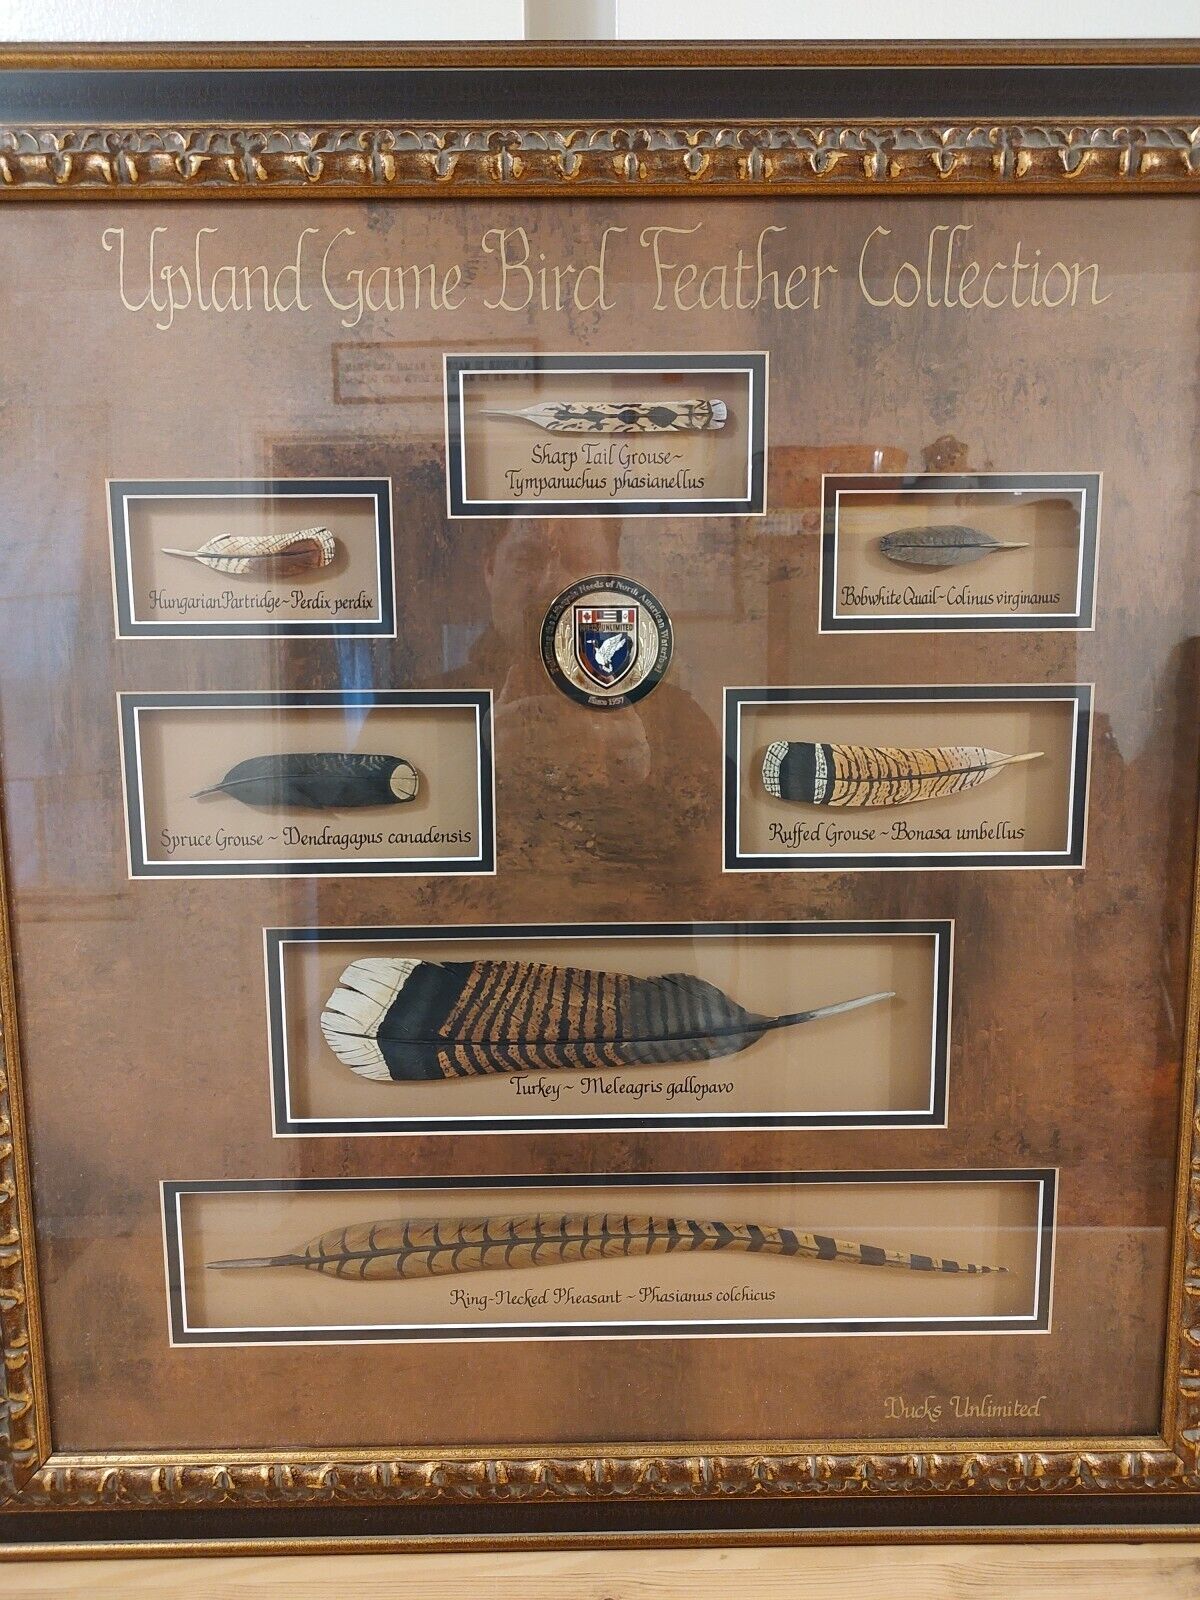 Ducks Unlimited Upland Game Bird Feather Collection